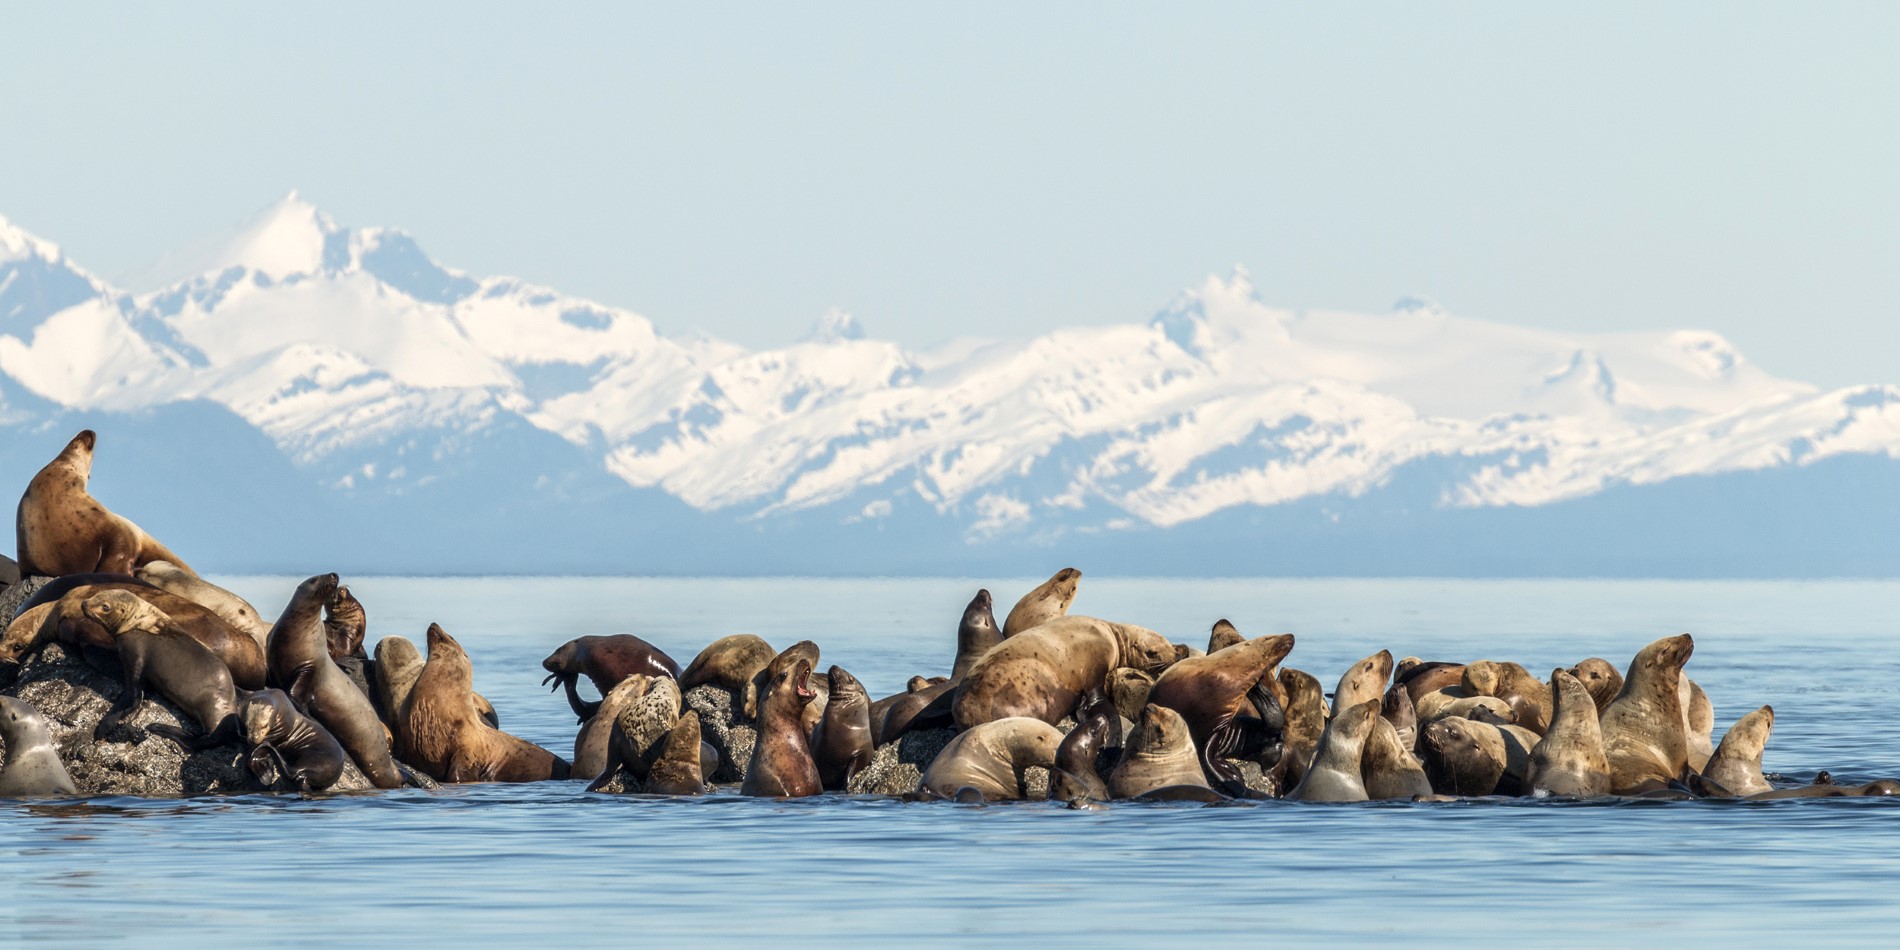 A herd of animals in a body of water